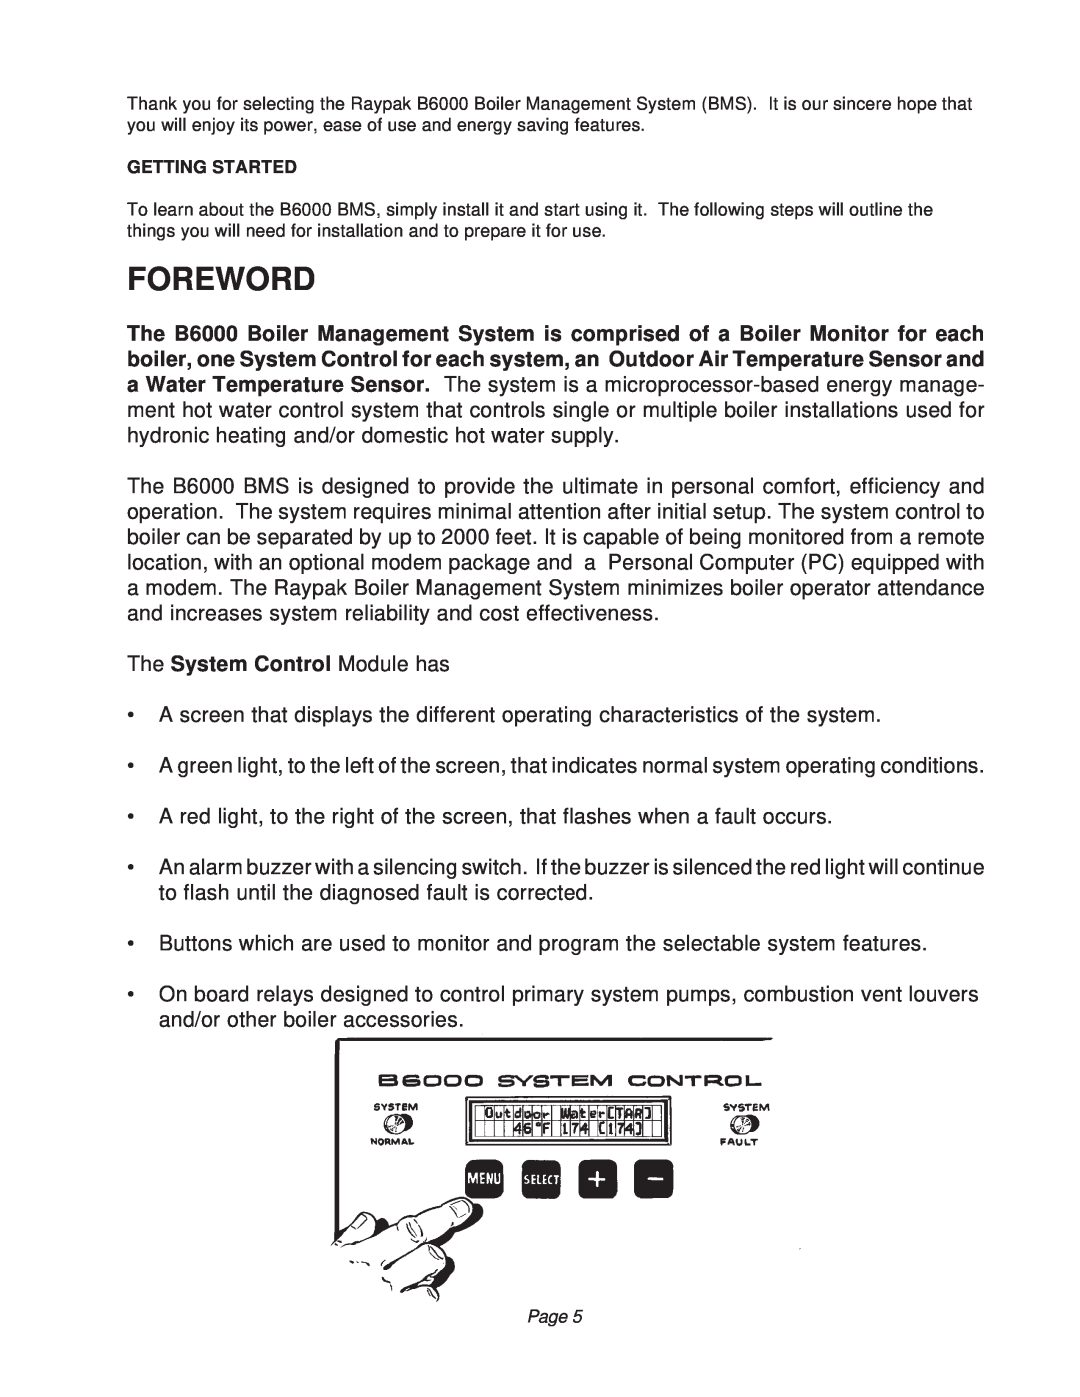 Raypak B6000 manual Foreword, The System Control Module has 